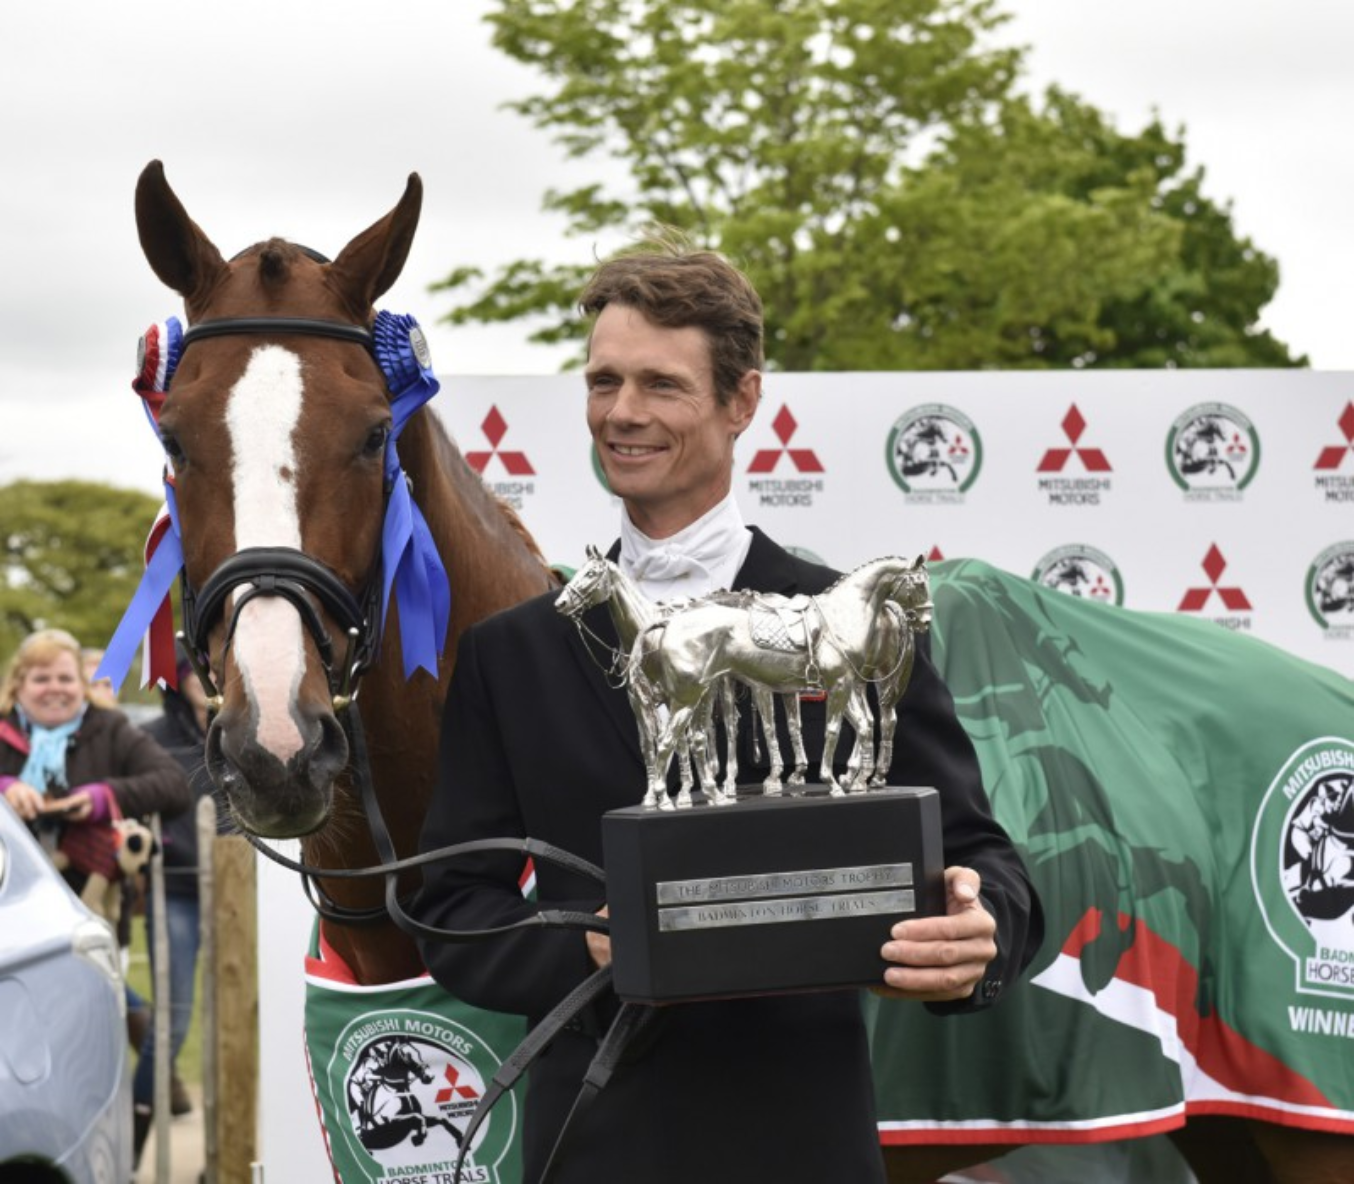 "Screenshot-2017-11-2 william fox pitt - - Yahoo Image Search Results.png"